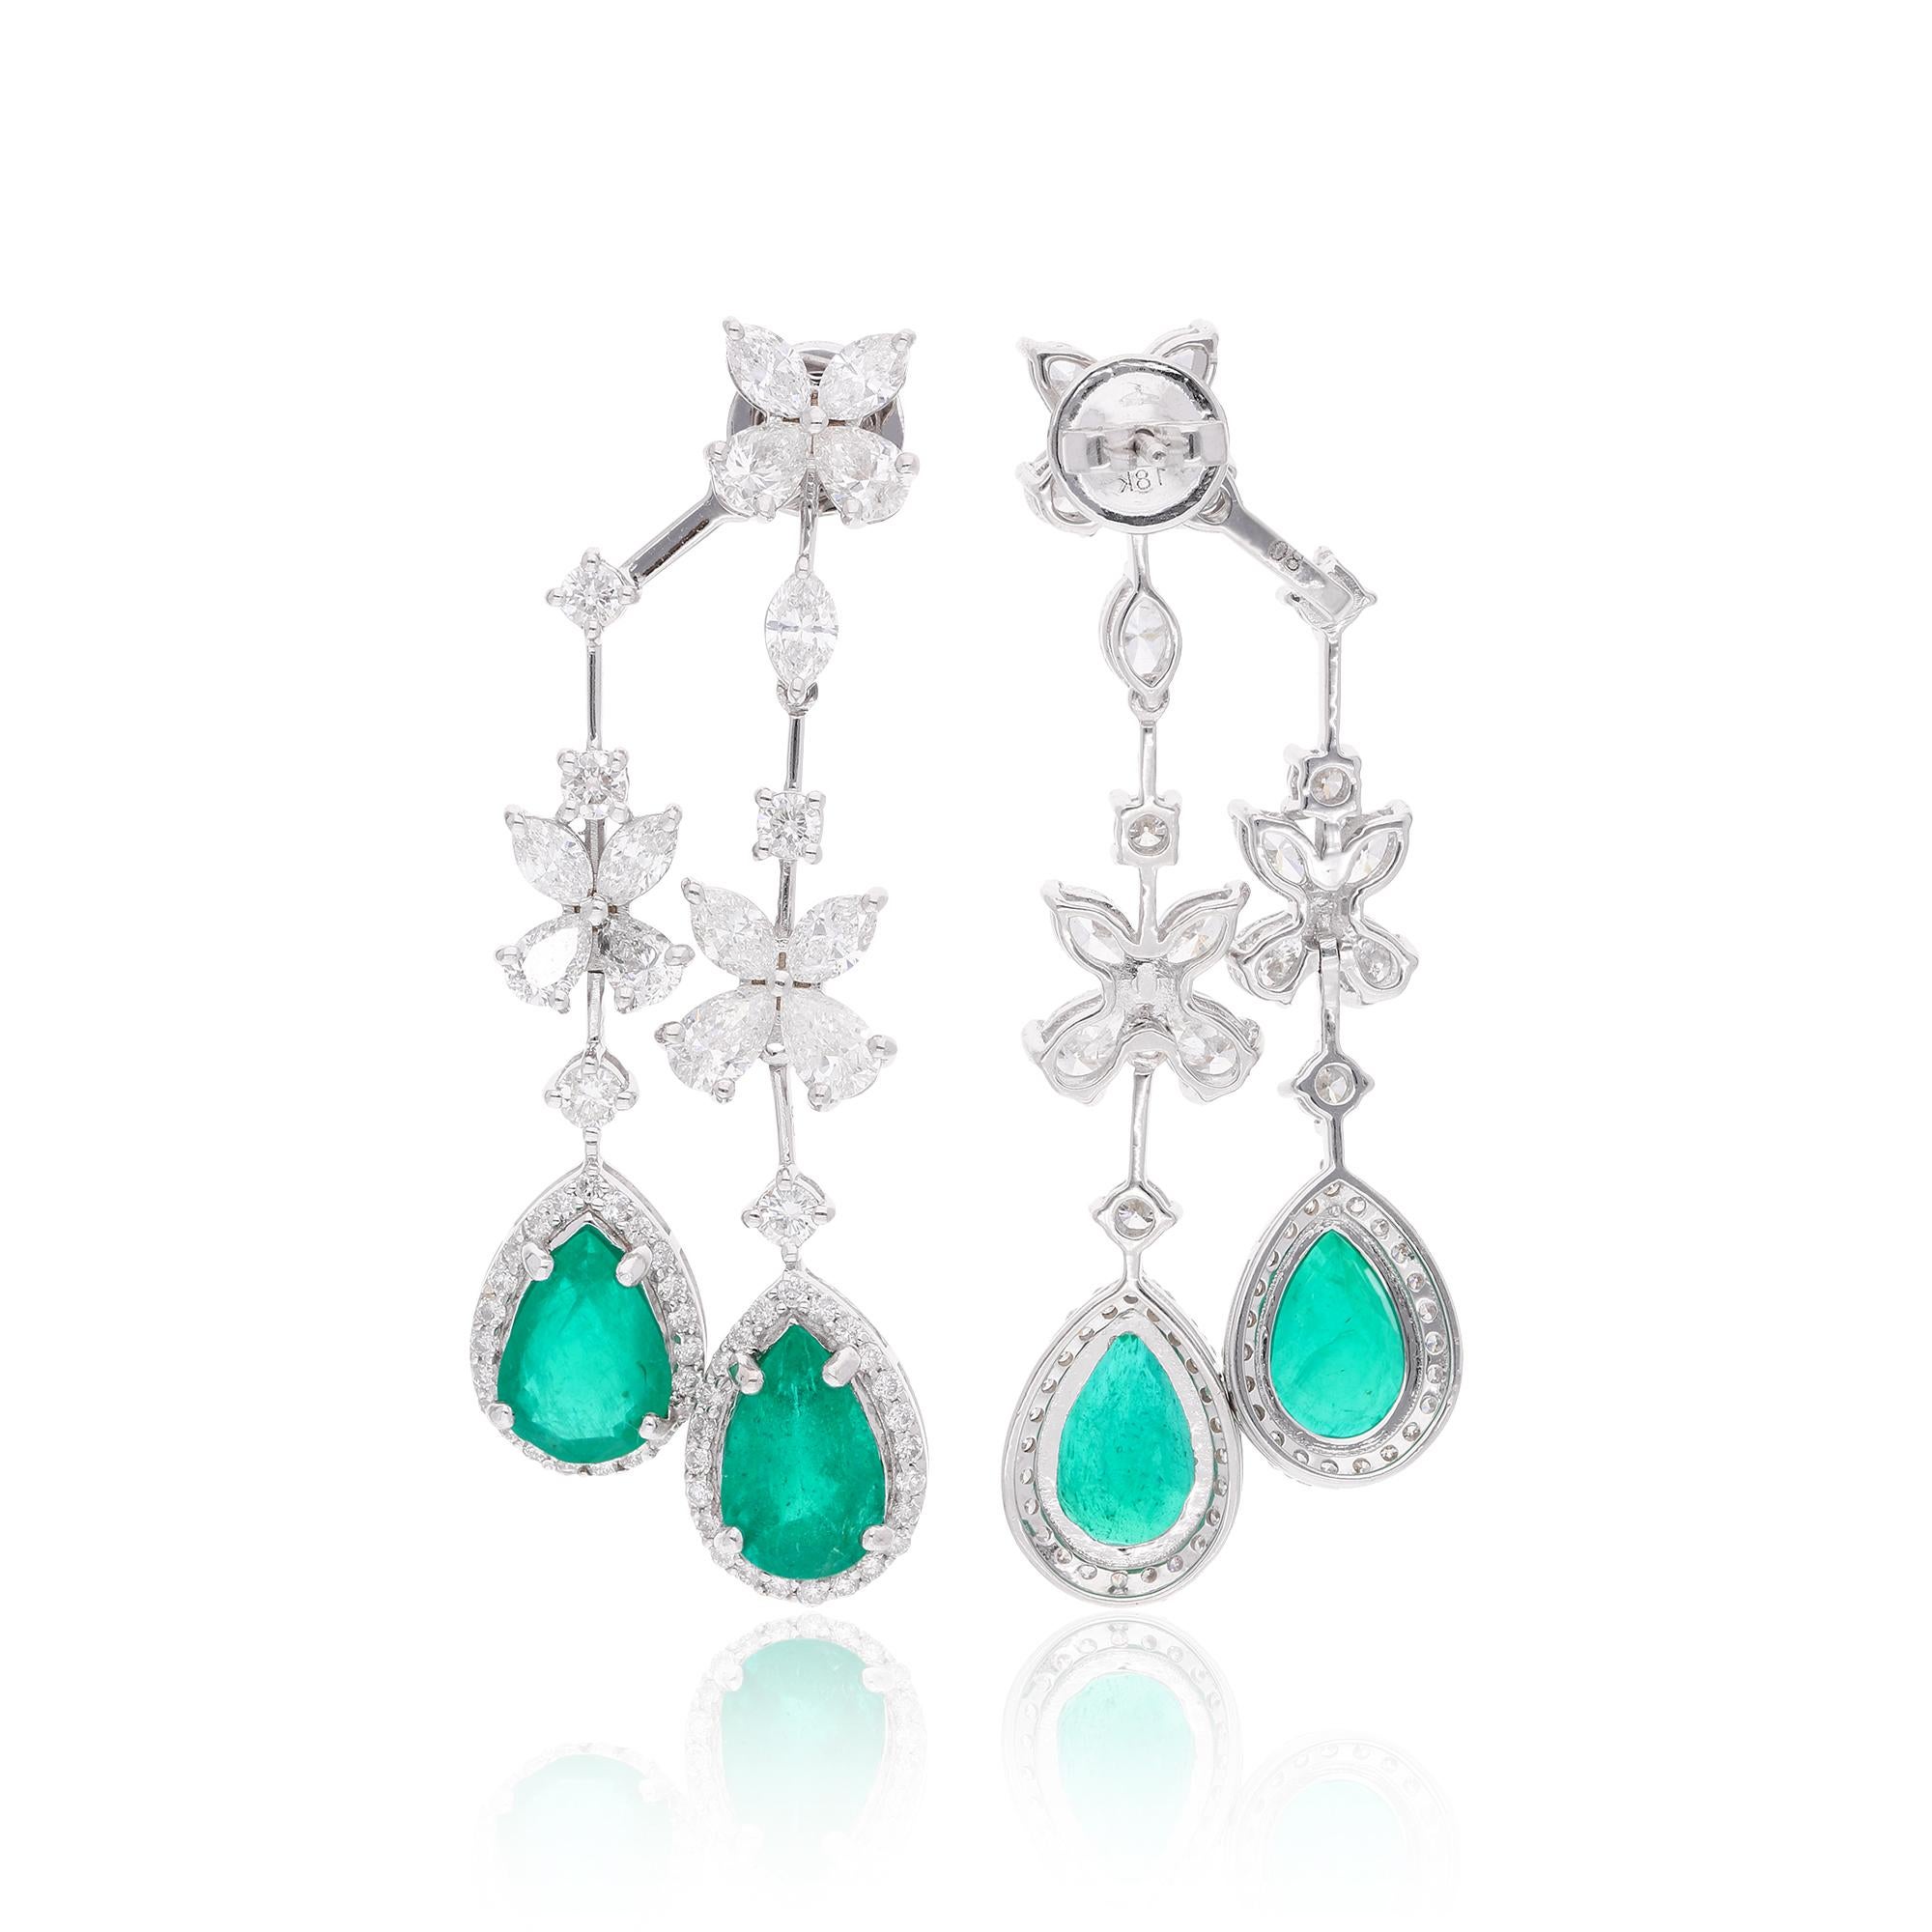 These Dainty Diamond Dangle Earrings with 5.48 ct. Genuine Diamonds & 6.95 ct. Zambian Emerald are a promise of perfection and purity. These earrings are set in 14k Solid White Gold. You can choose these earrings in 10k/14k/18k, Rose Gold/White